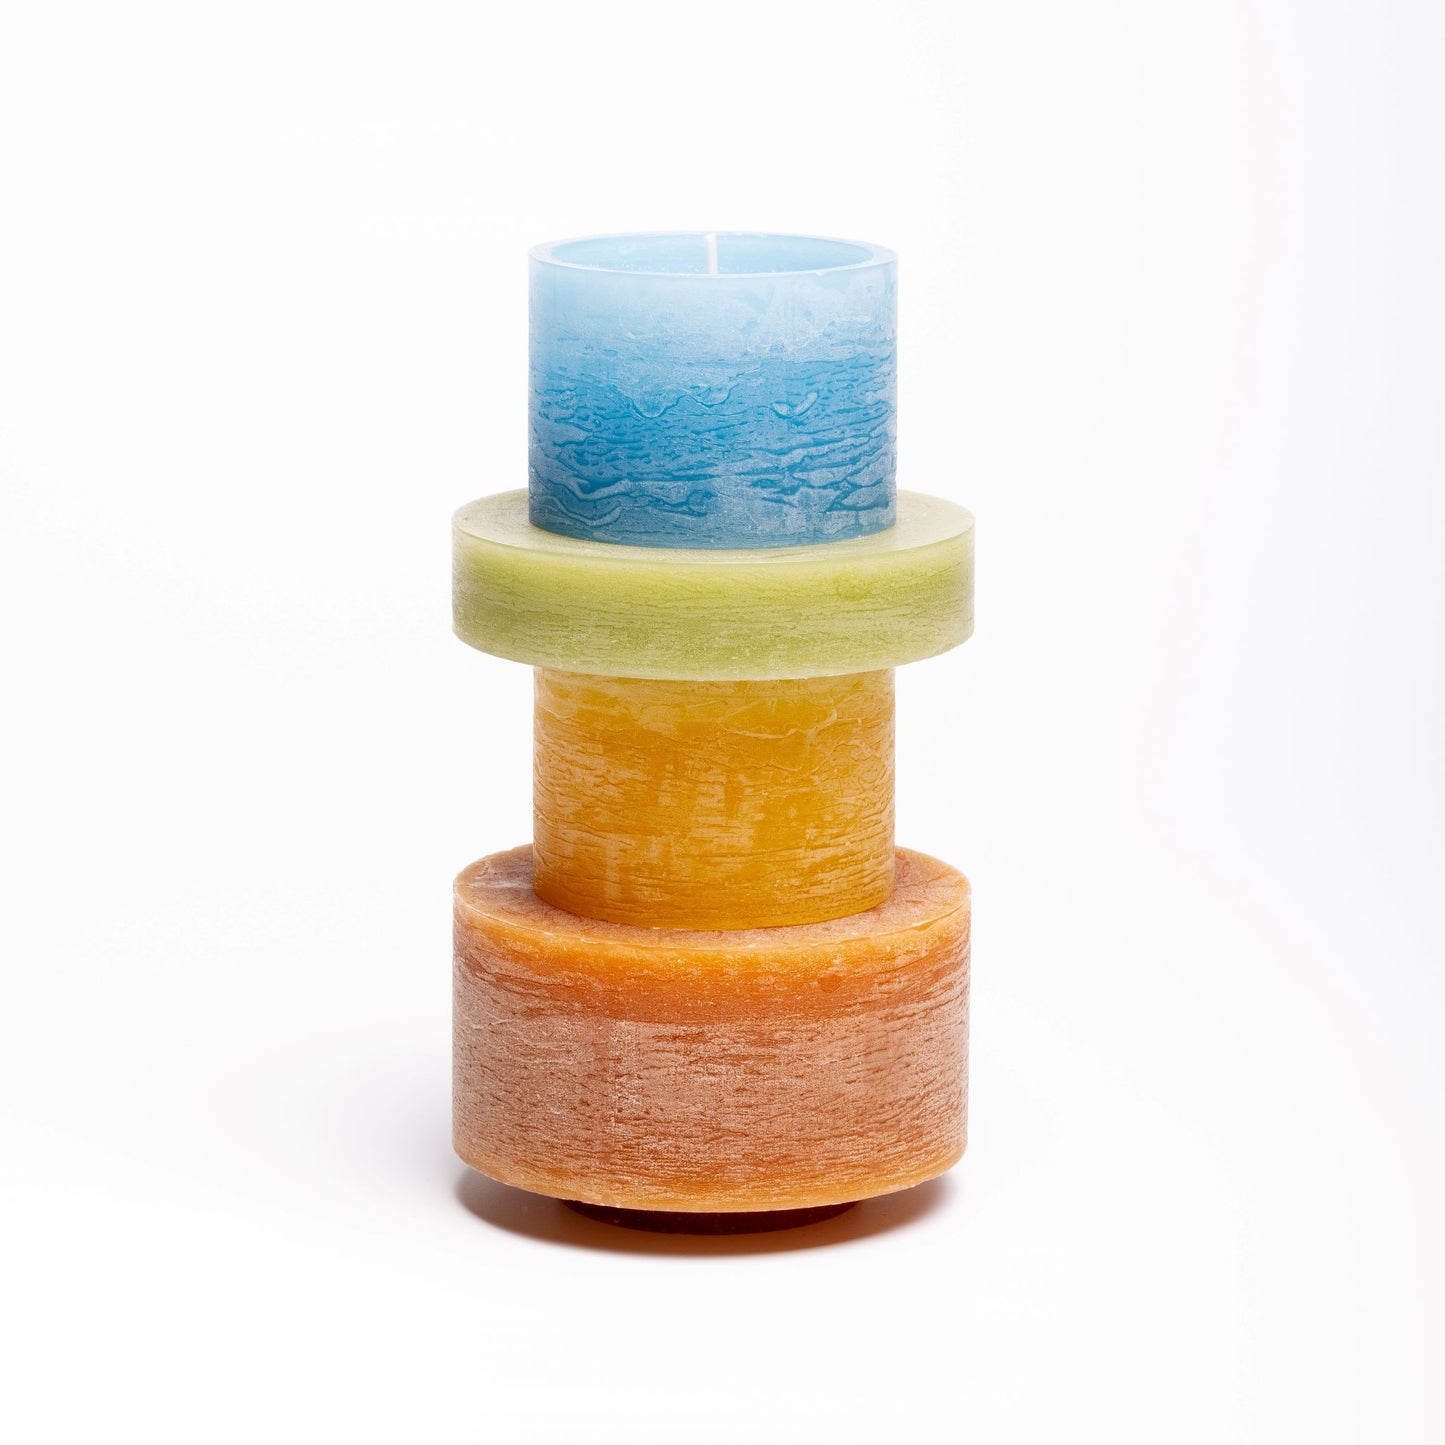 Stan Editions - Candl Stacks - Stack 04